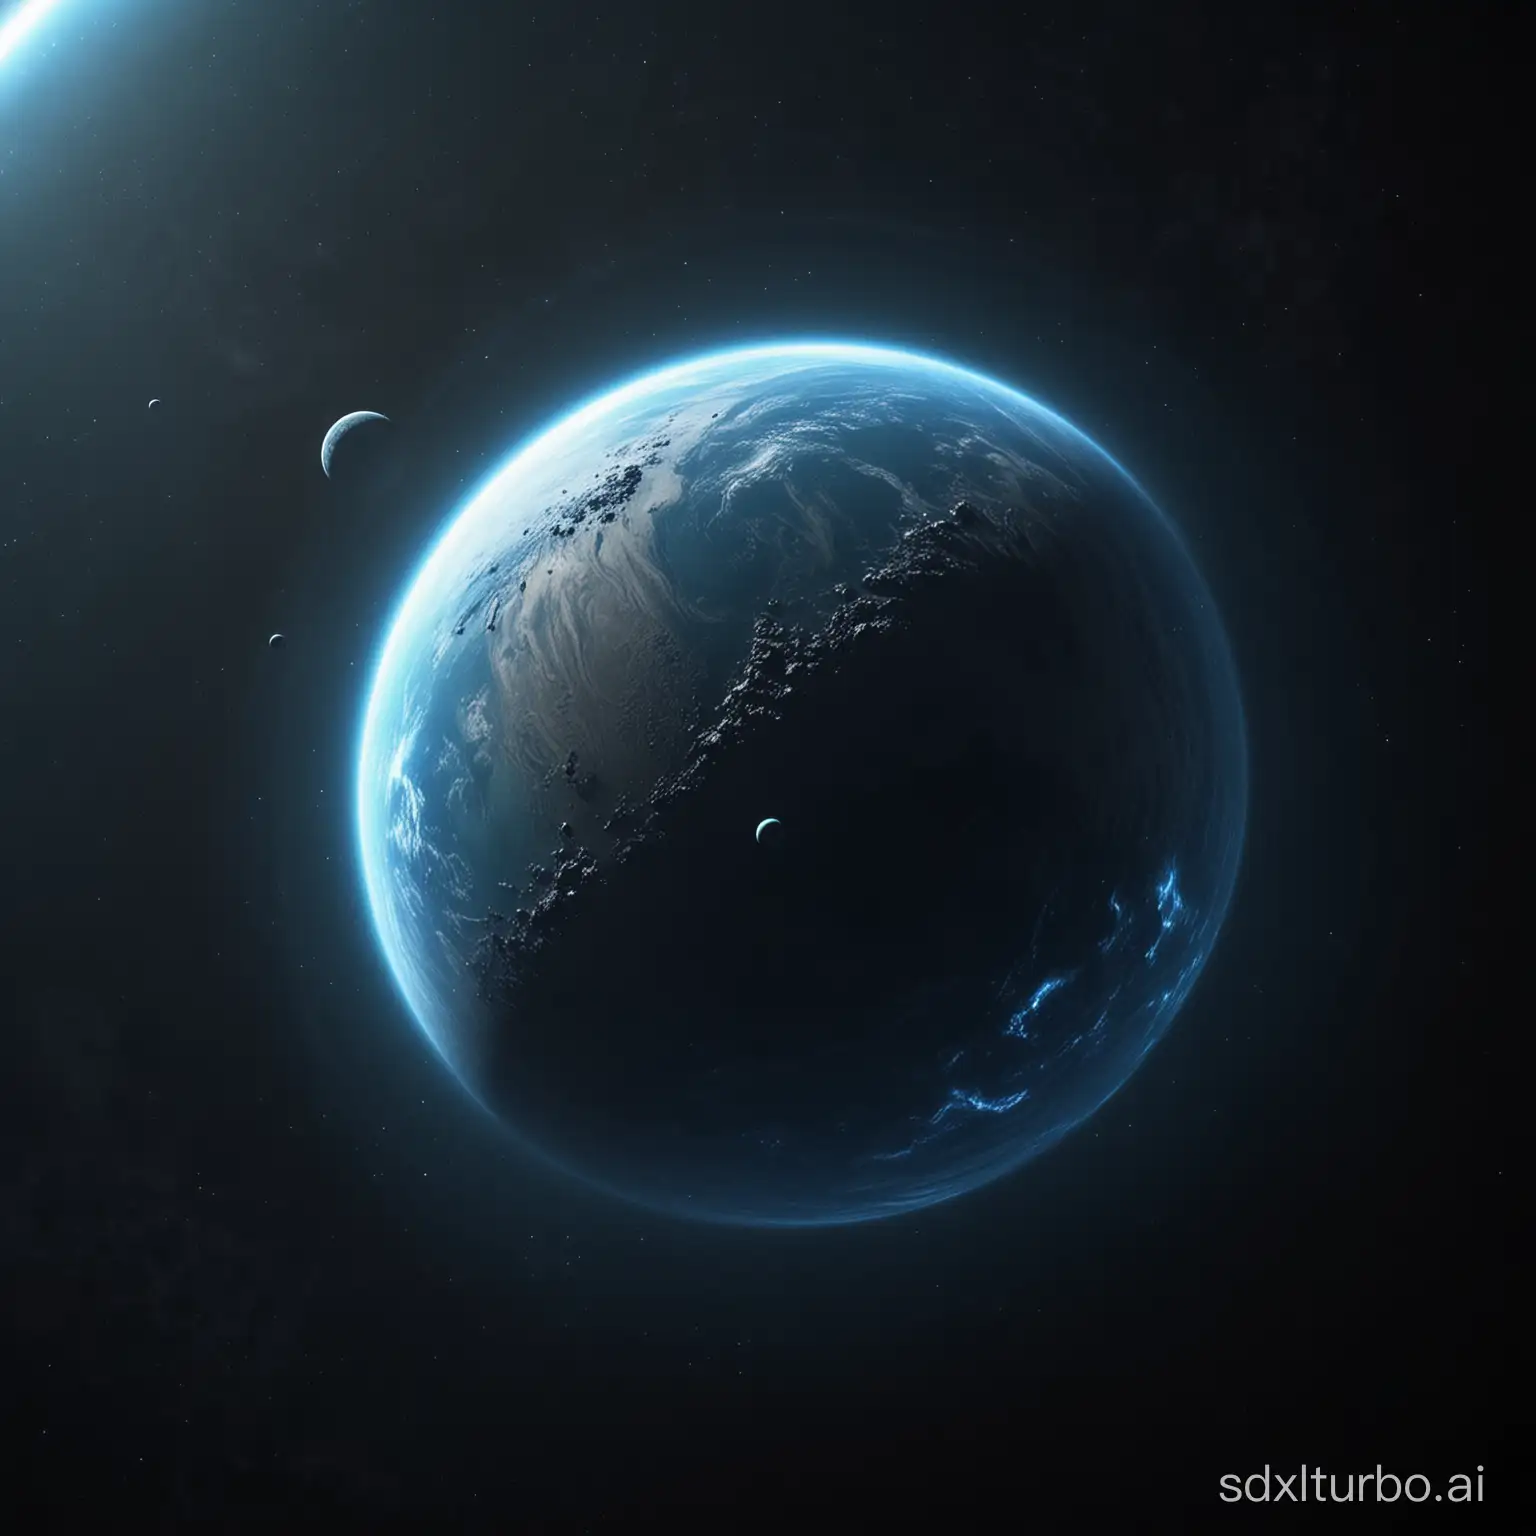 a blue gas planet, view from orbit, dark atmosphere, planet takes up half of the image, background for a game